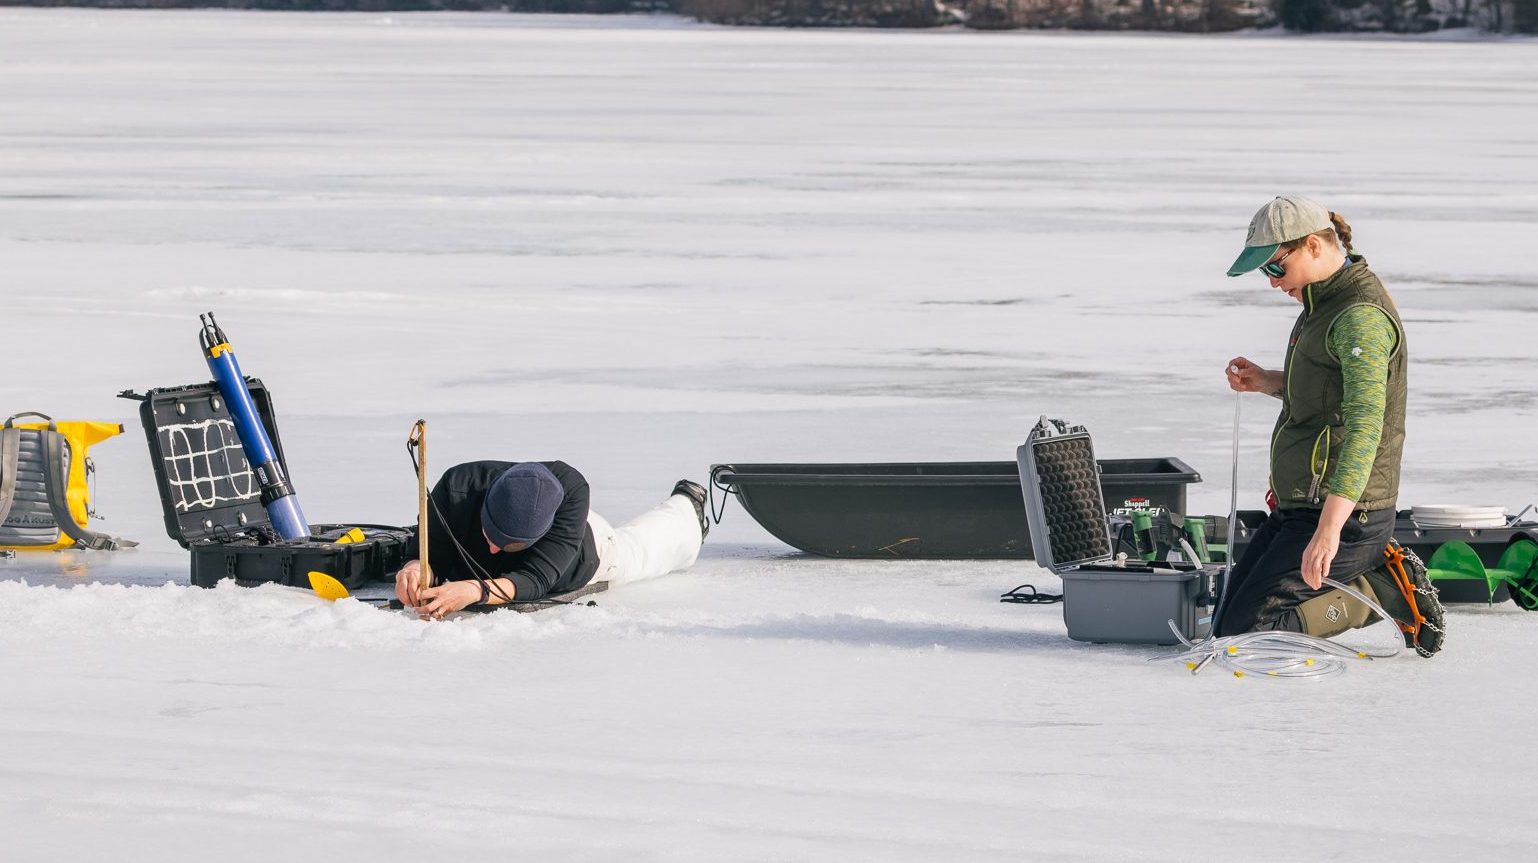 LEA staff taking measurements on the ice of Sand Pond